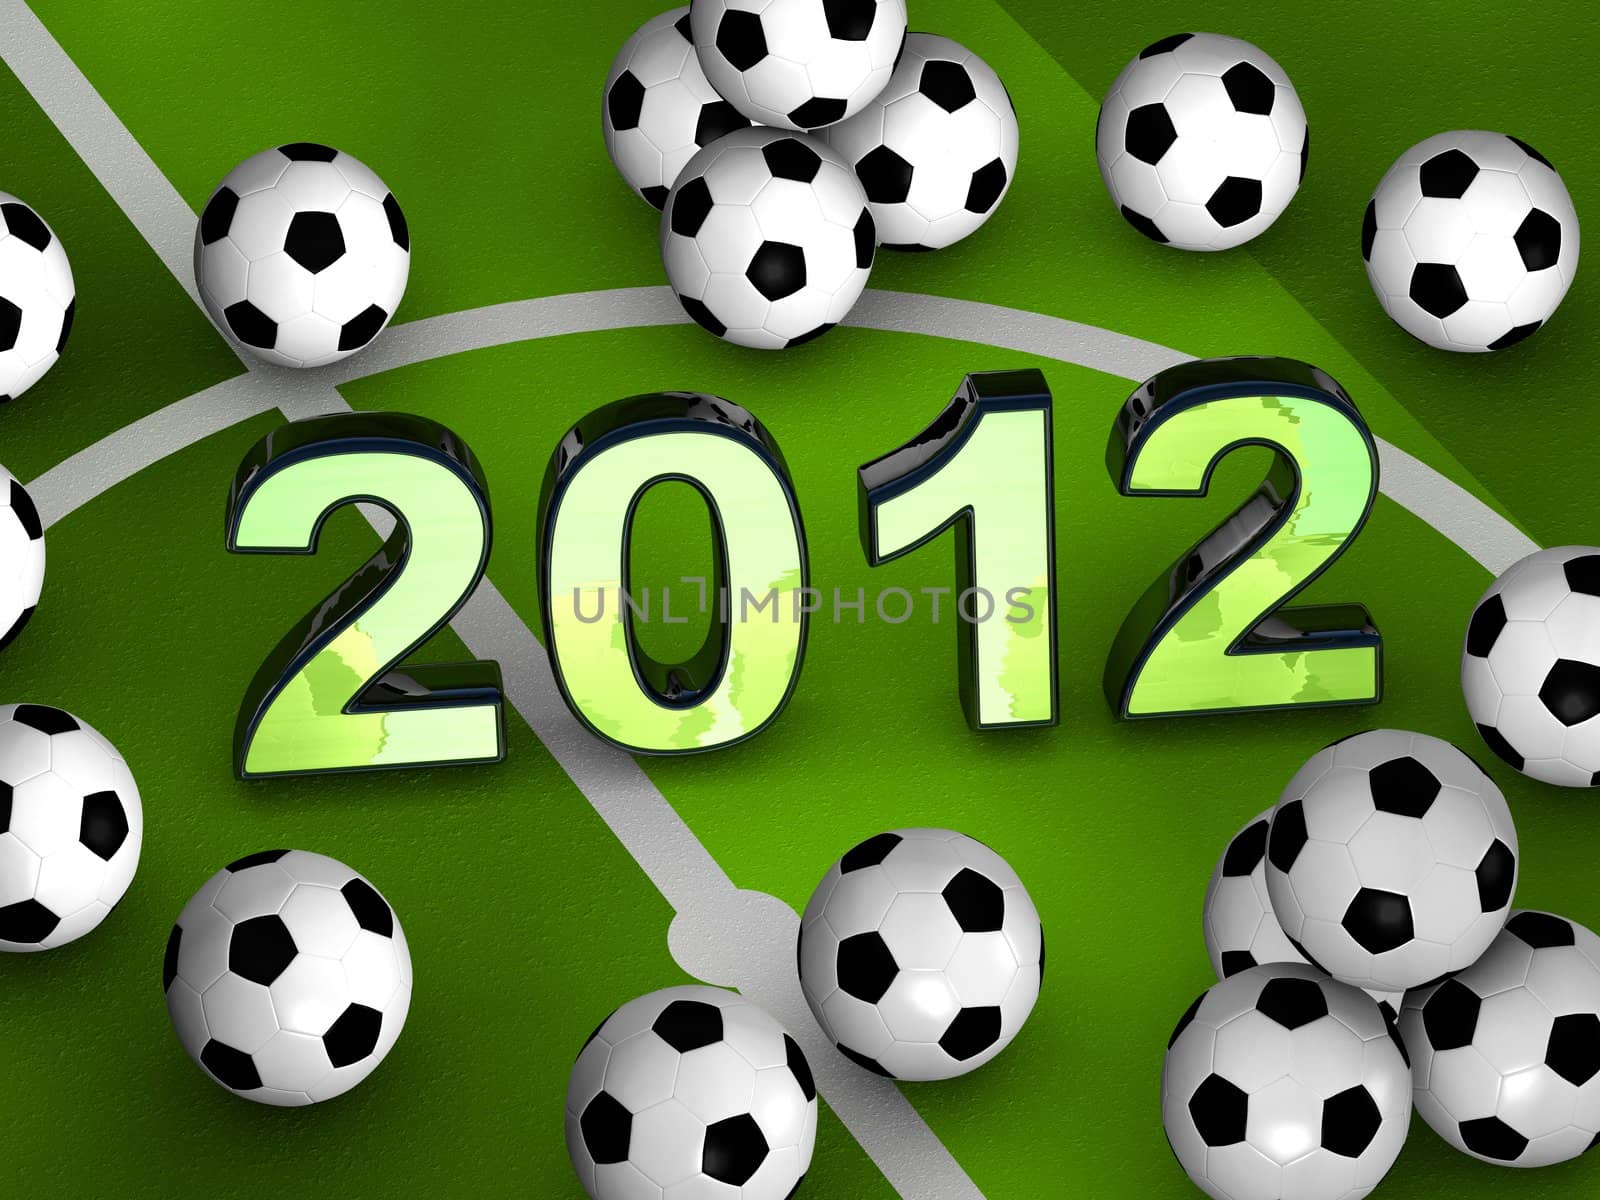 2012 in the middle of a green playground with many soccerballs